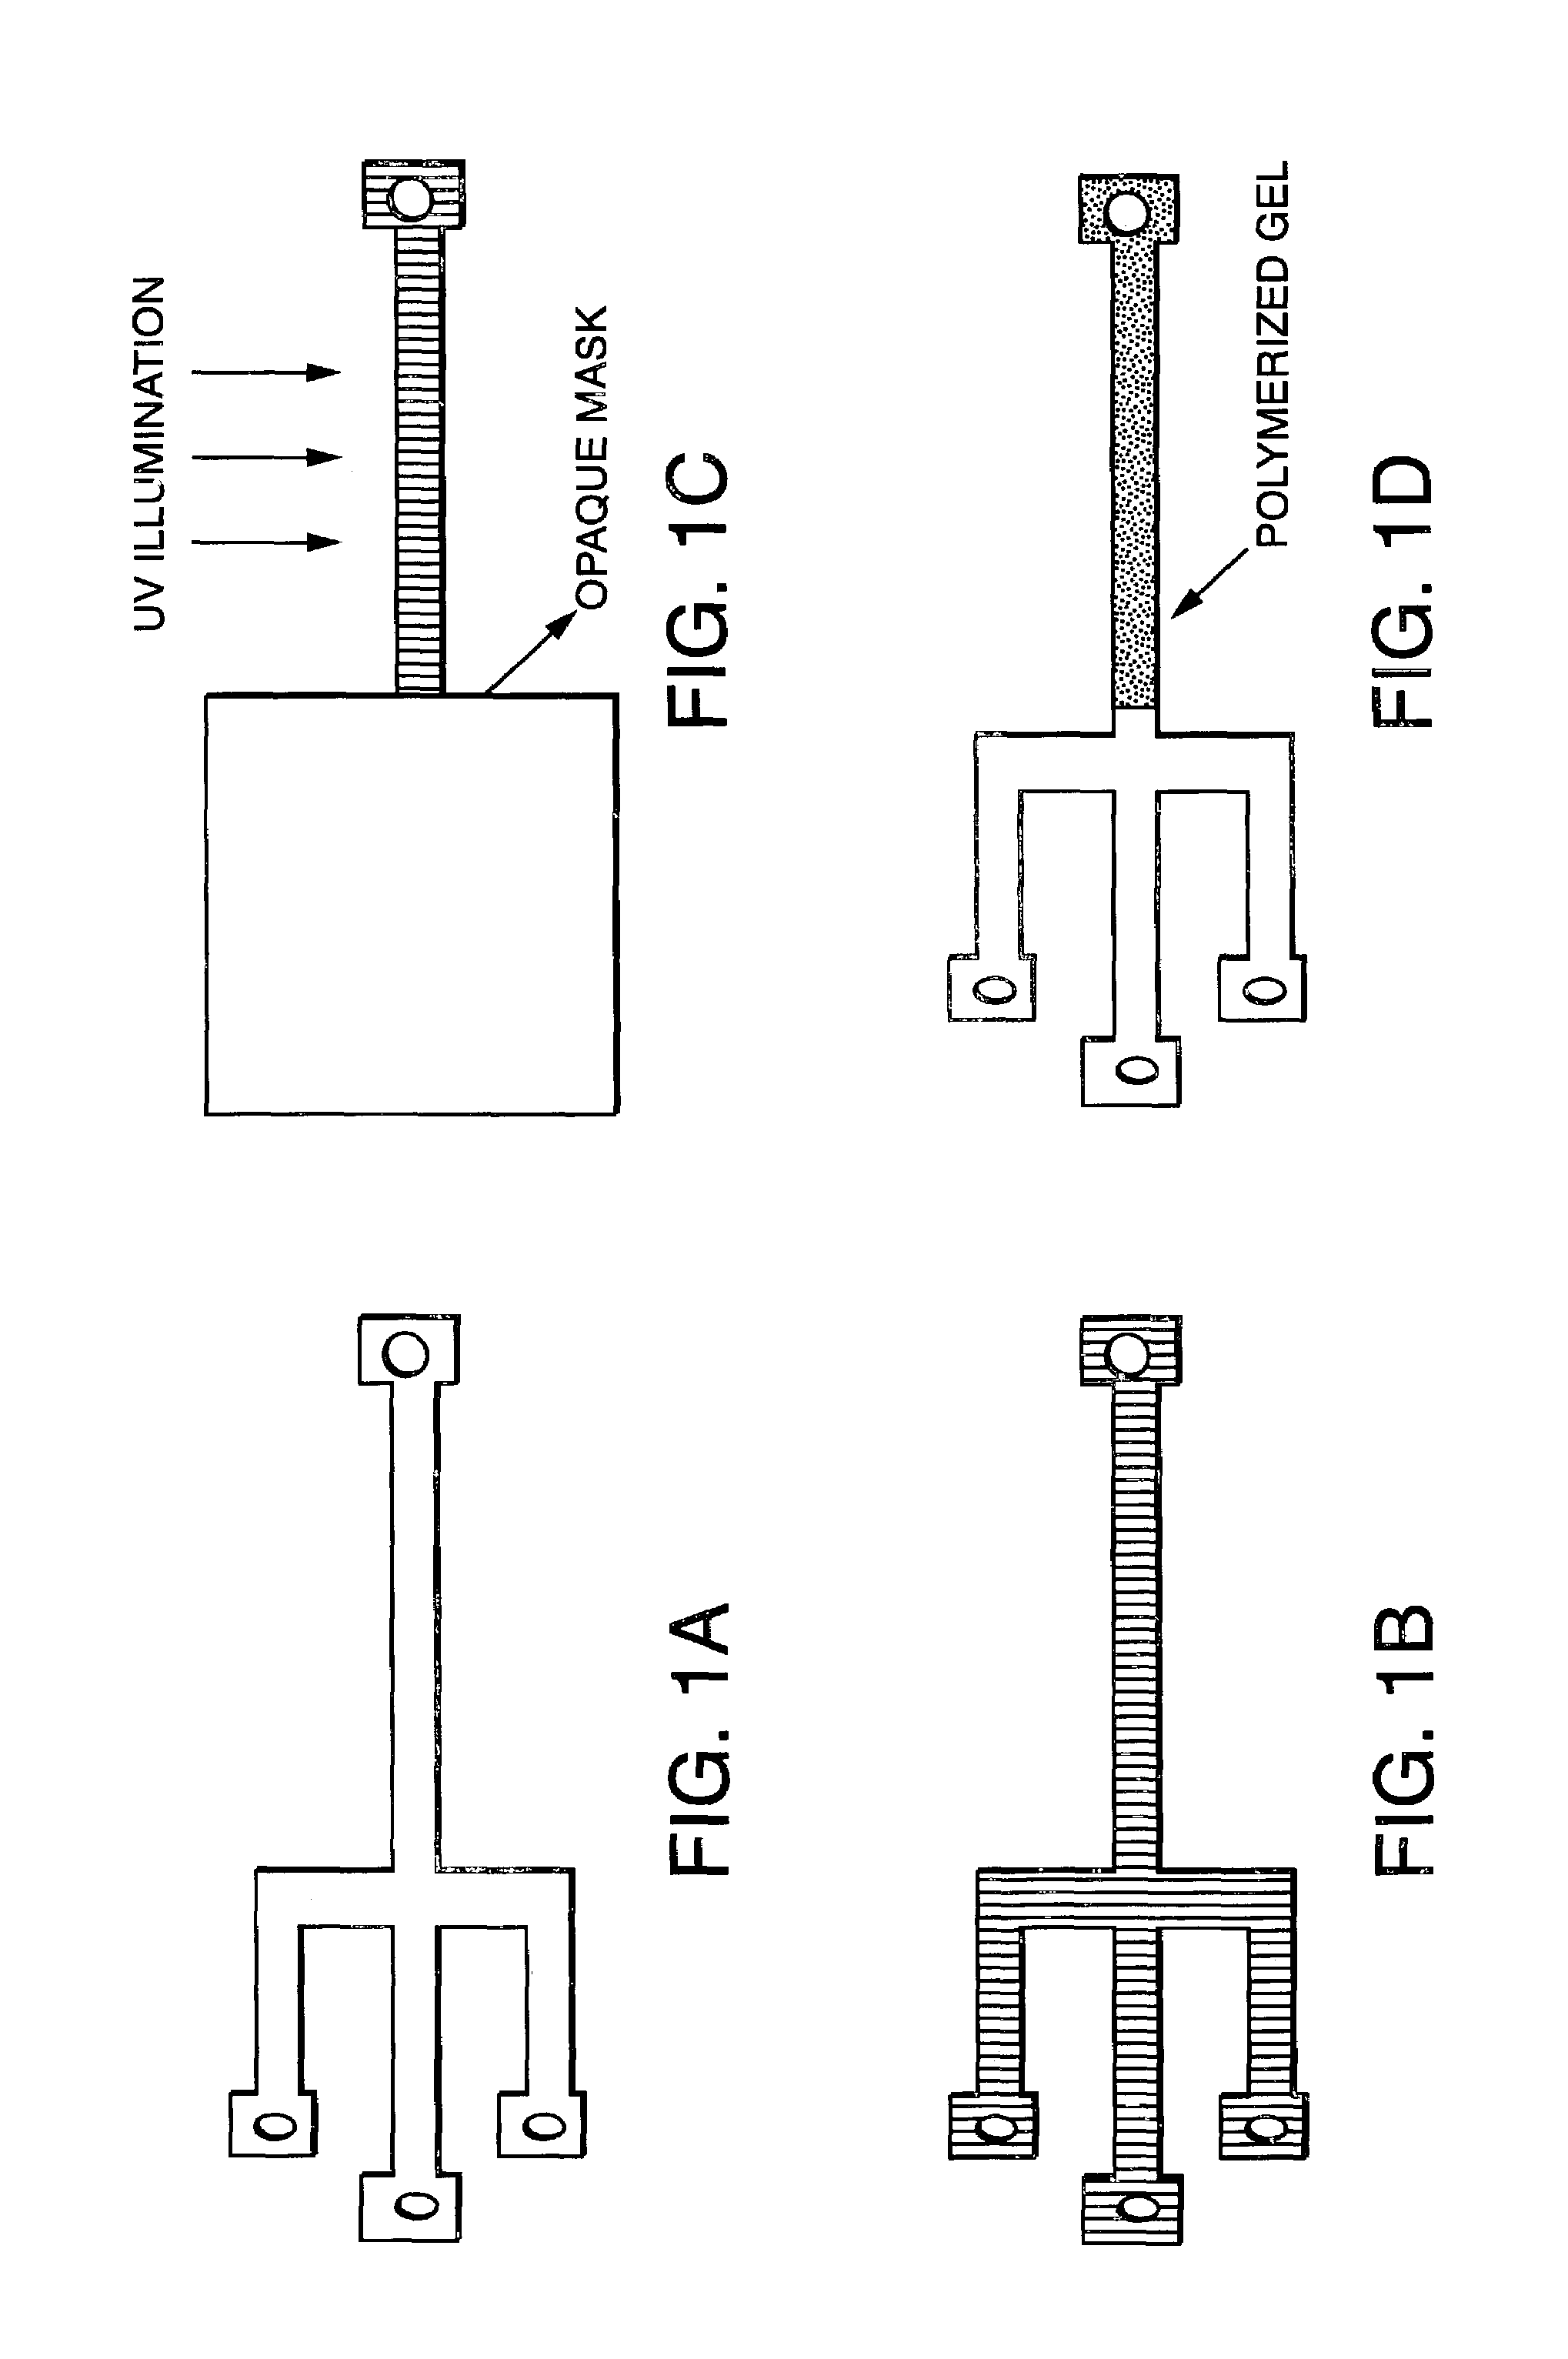 Electrophoresis in microfabricated devices using photopolymerized polyacrylamide gels and electrode-defined sample injection